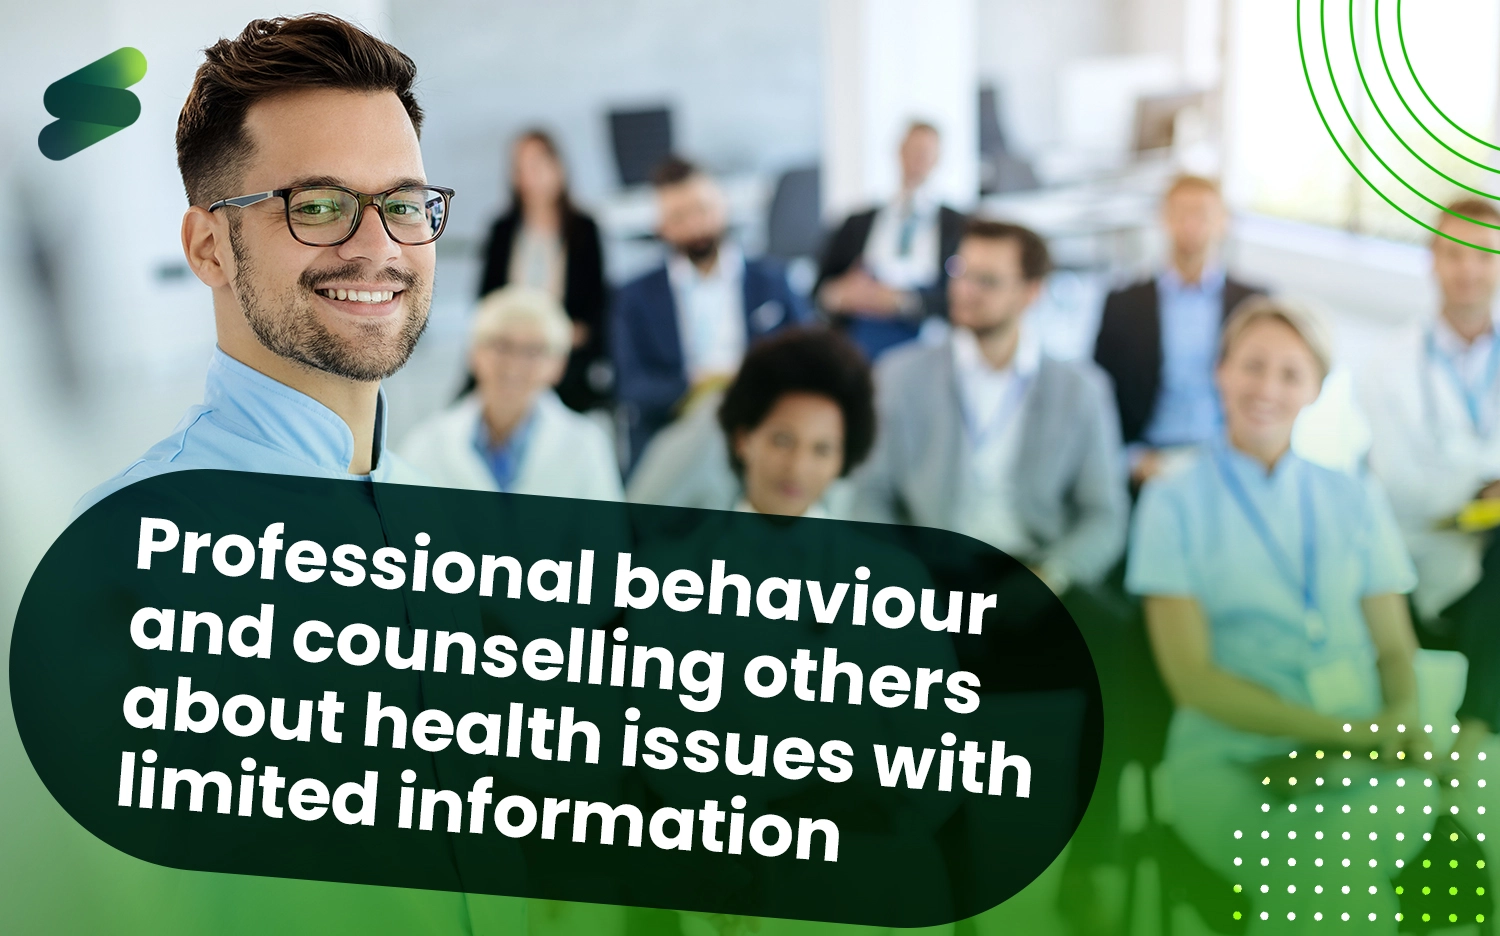 Professional behaviour and counselling others about health issues with limited information